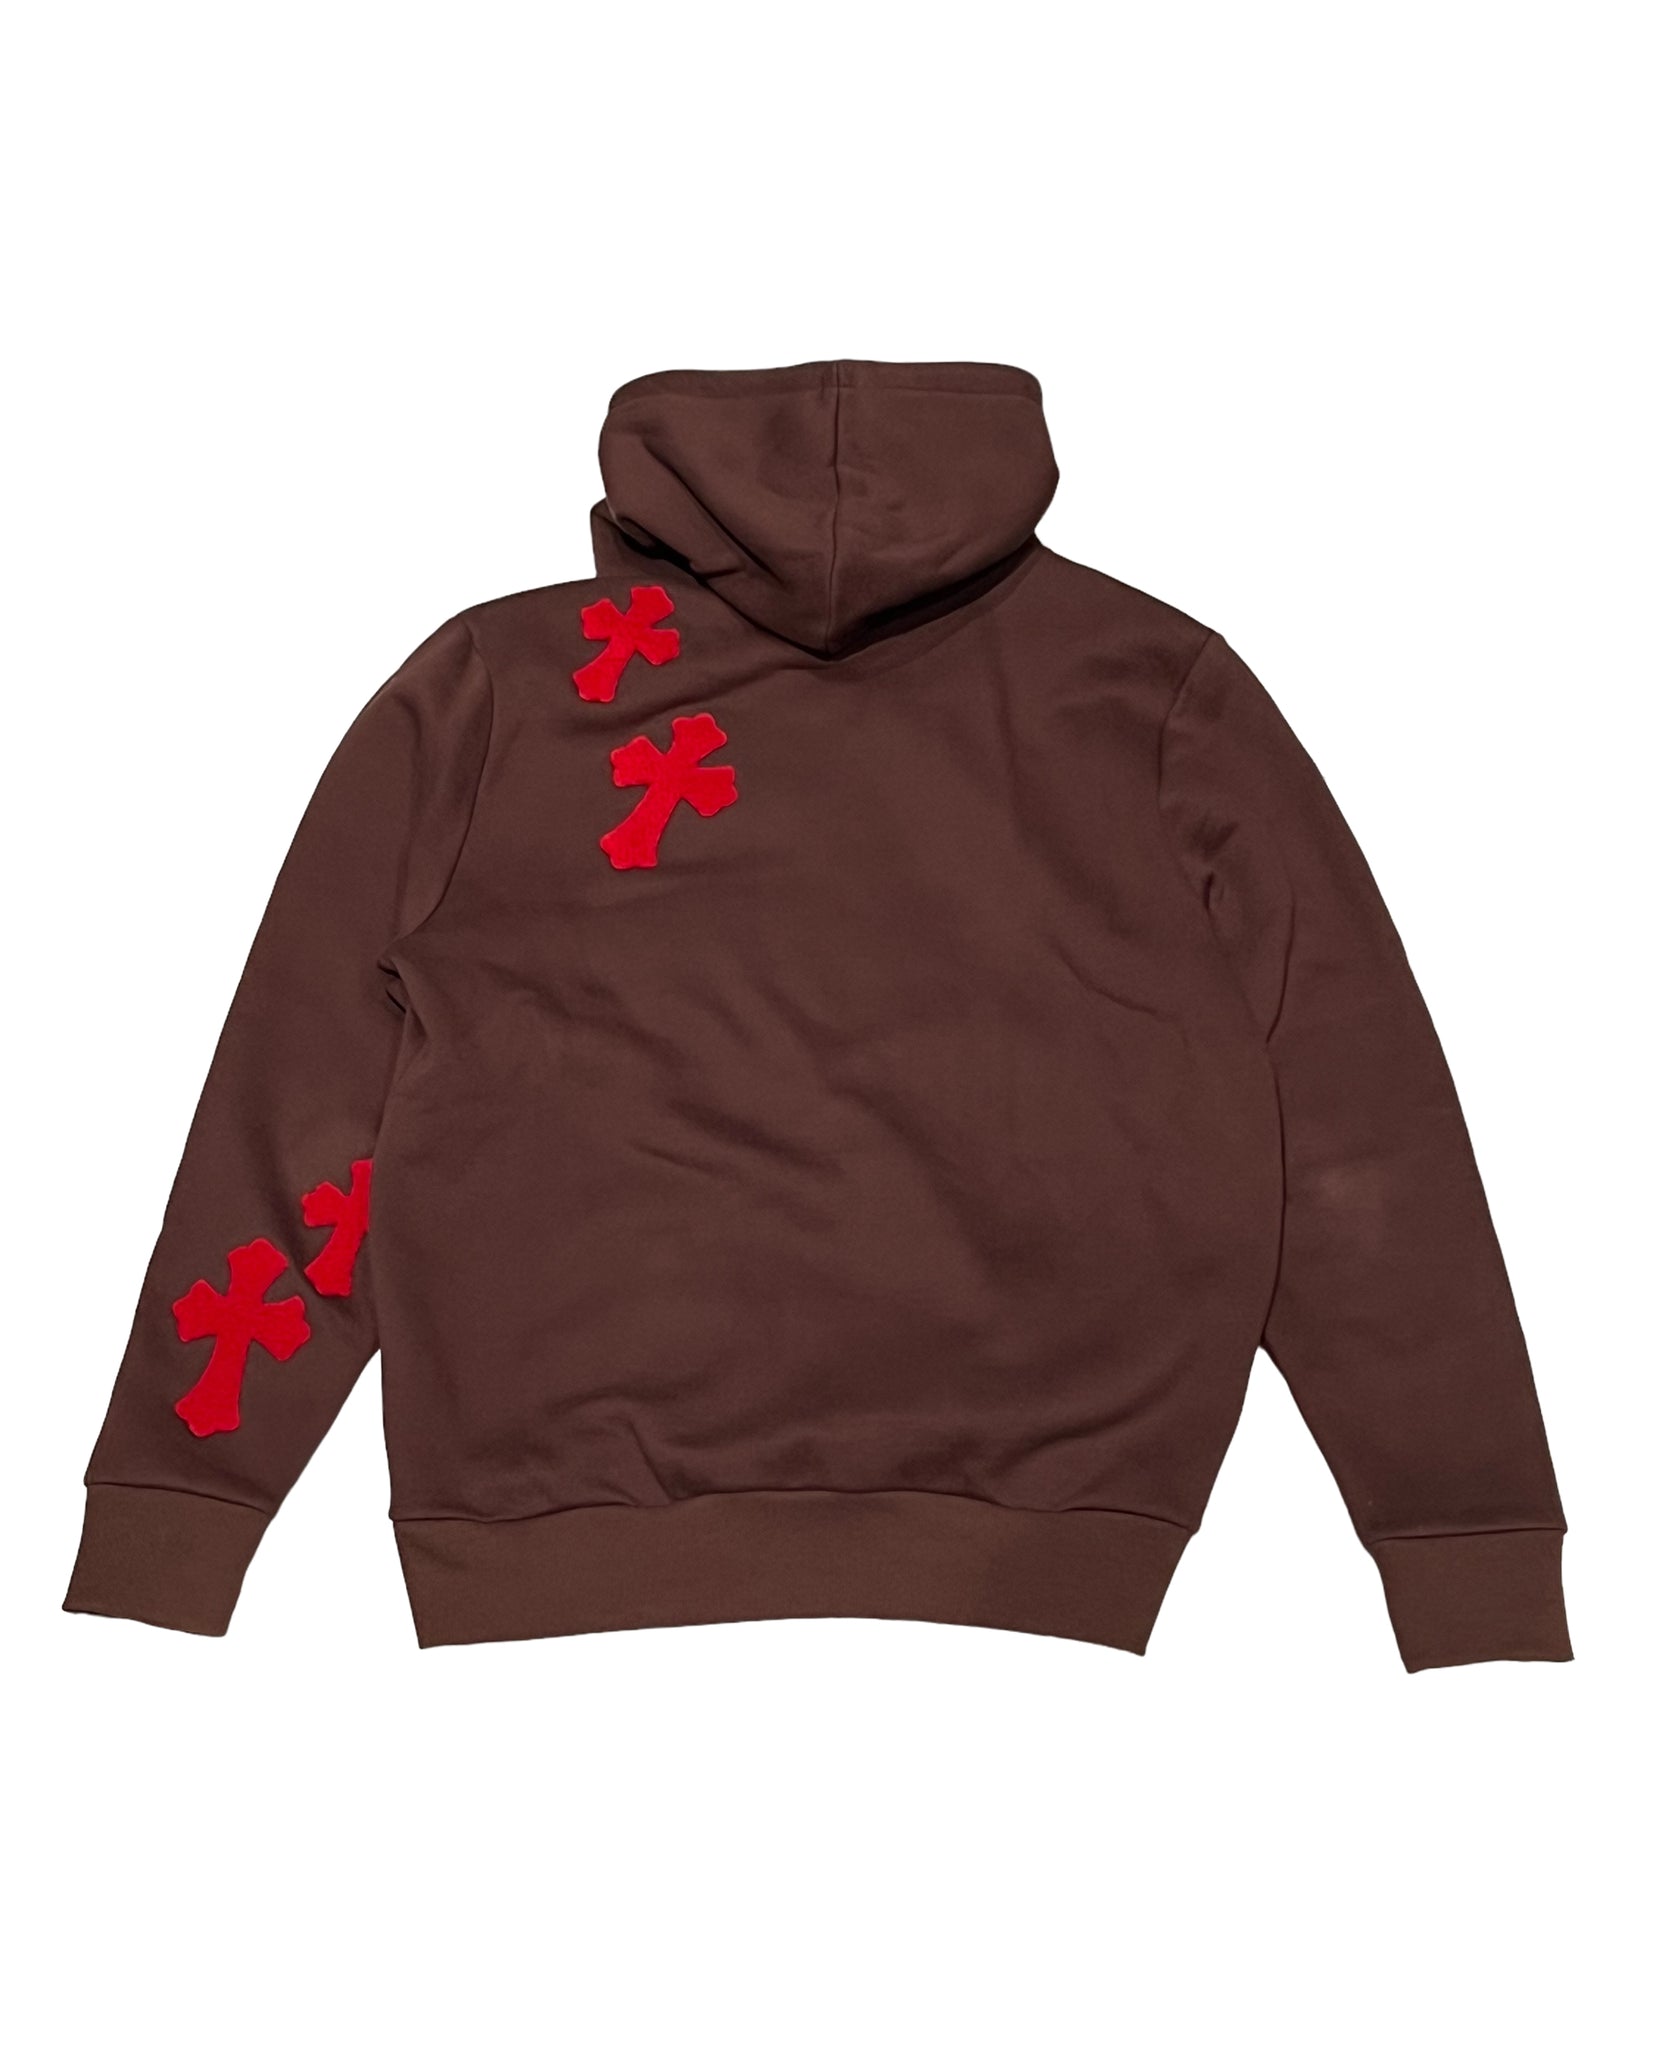 Chenille Snitching Hoodie - Mocha Brown